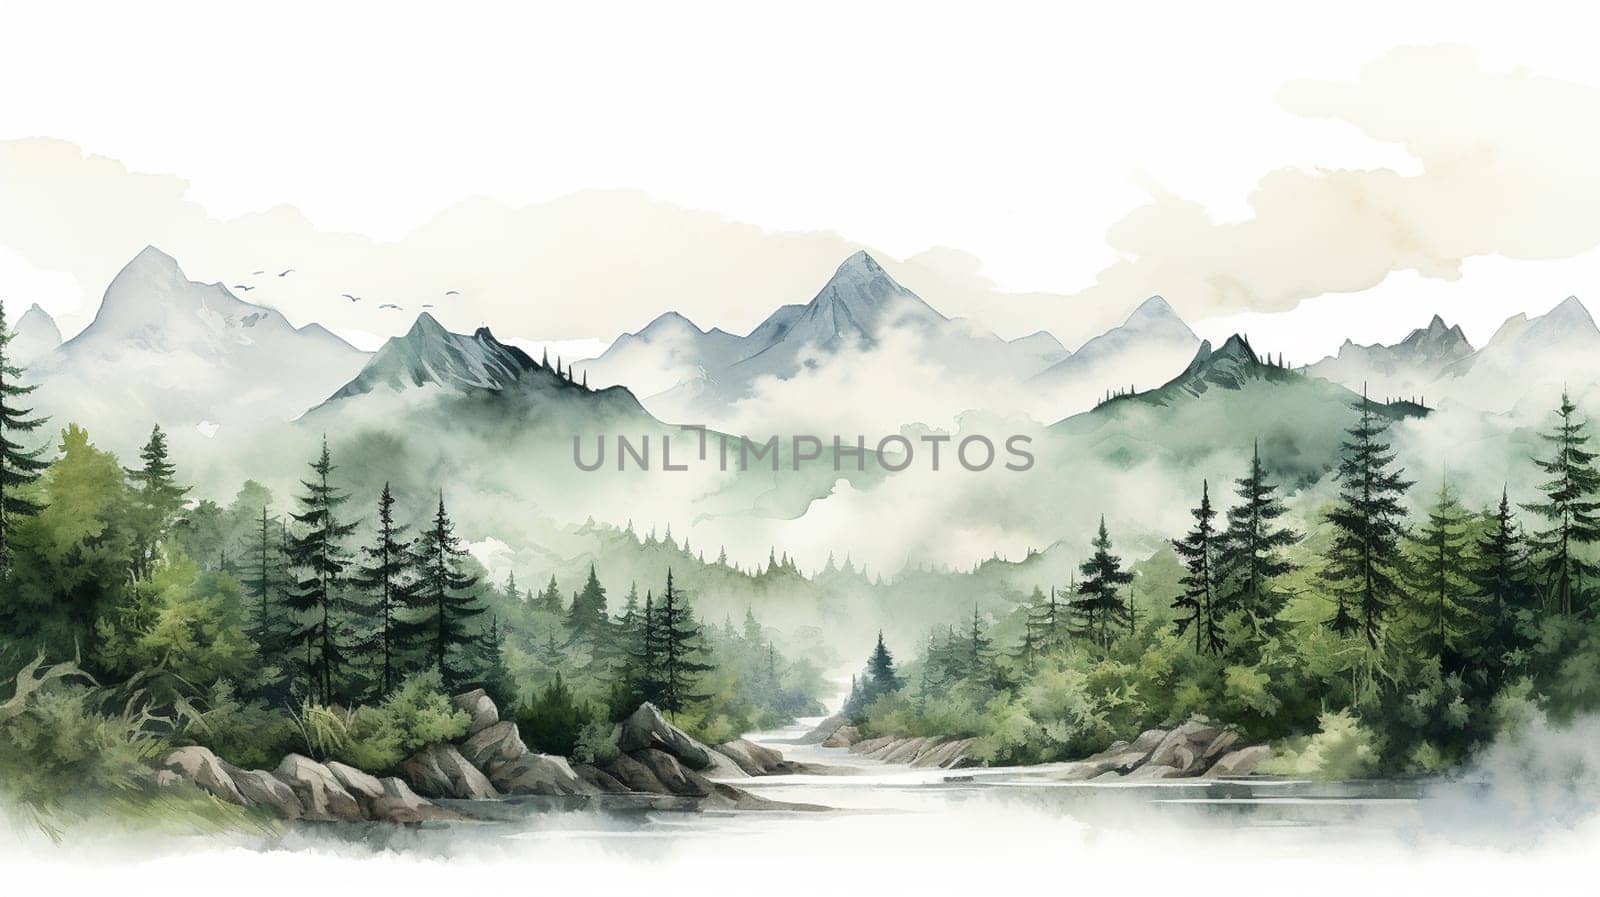 Digital painting of a mountain lake with mountains and trees in the background, Generate AI by Mrsongrphc